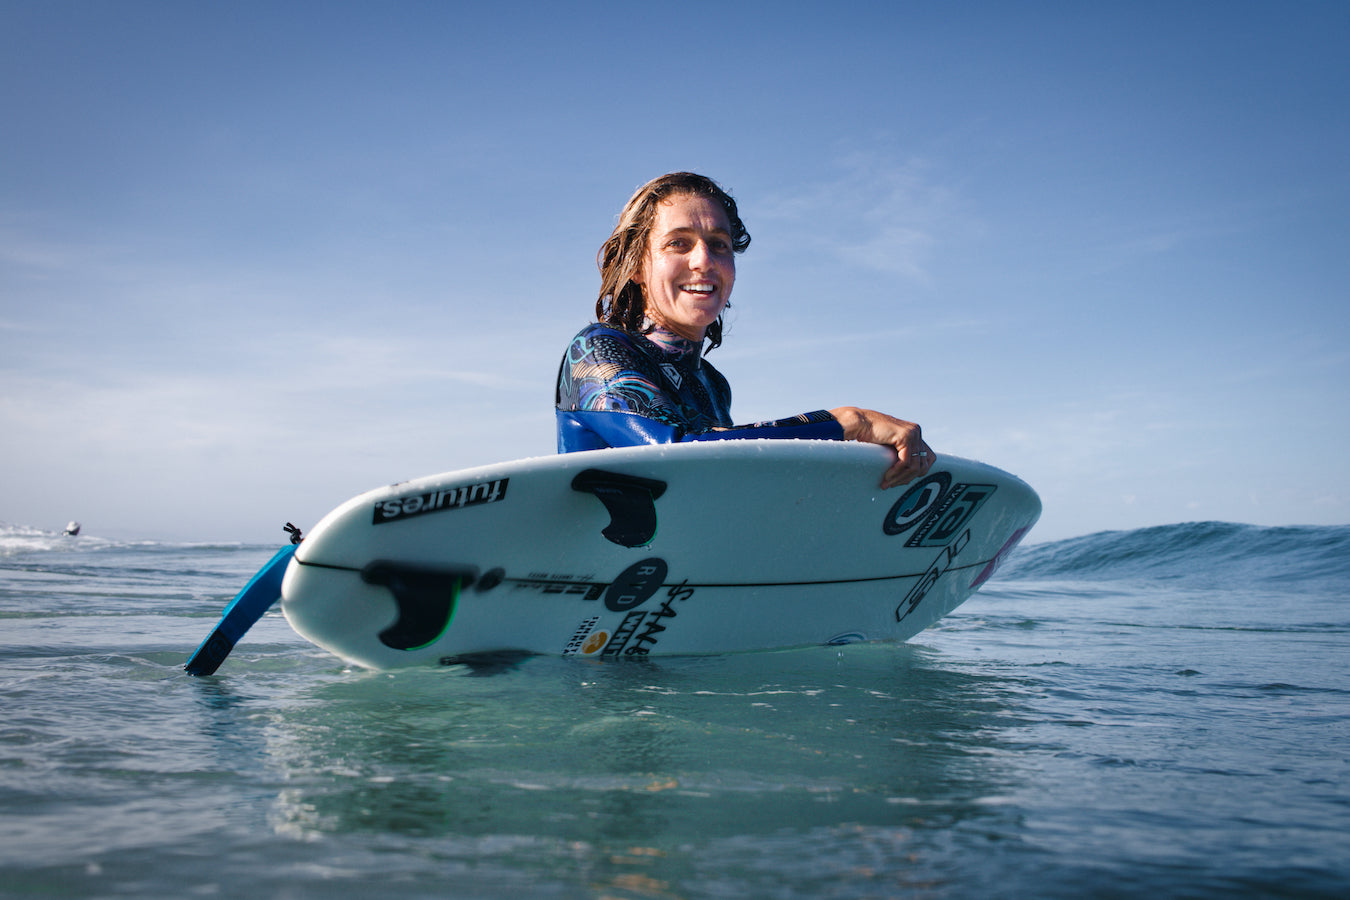 Philippa Anderson - More than just a pro surfer.